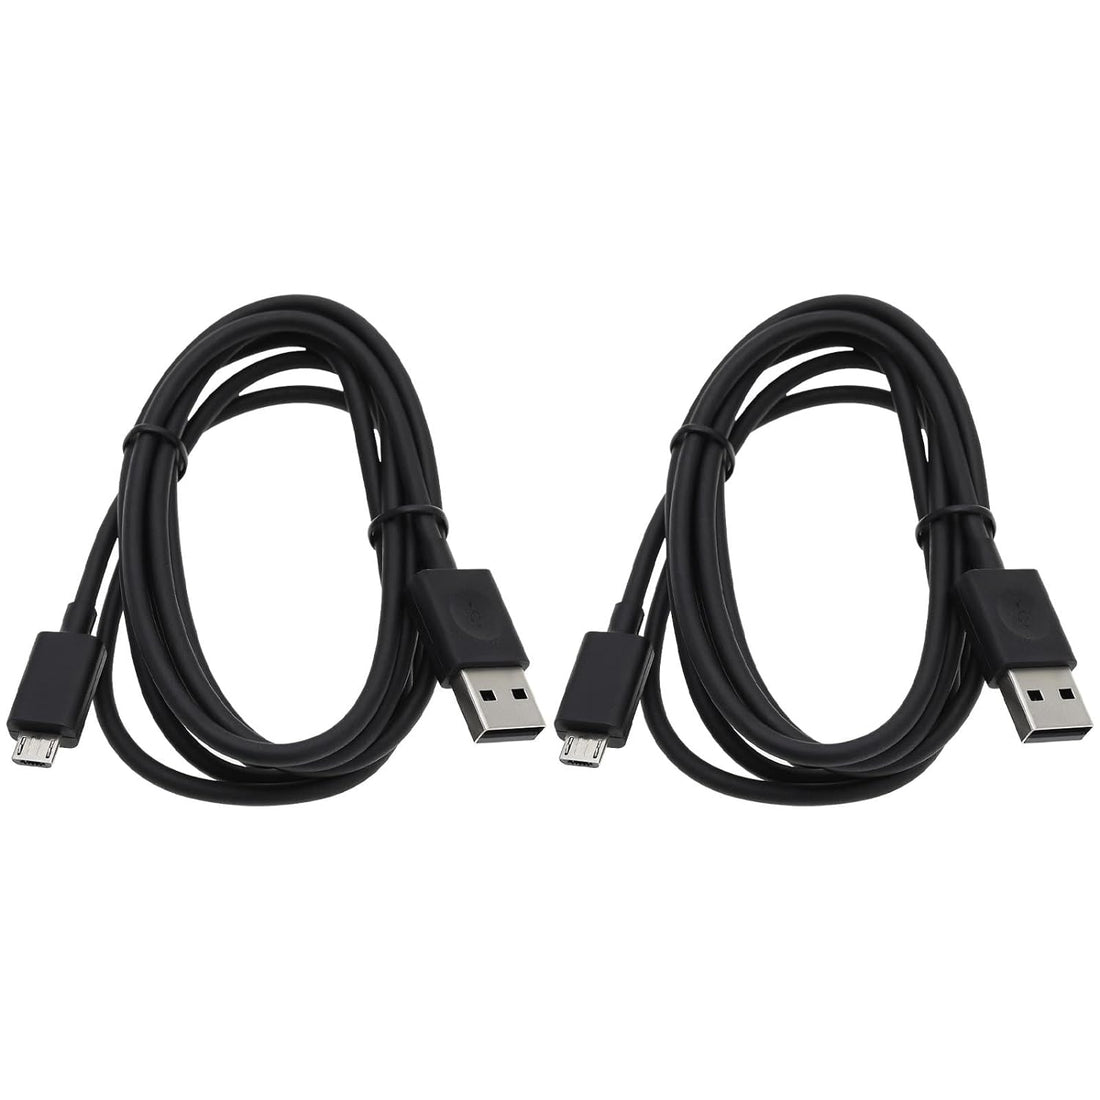 Micro Traders 2PCS USB Sync Cable Charging Cable Data Cable 1.5m Compatible with Kindle Fire HD 6/7/8/8.9 Fire HDX 7/8.9 Paperwhite Voyage E-Book Reader